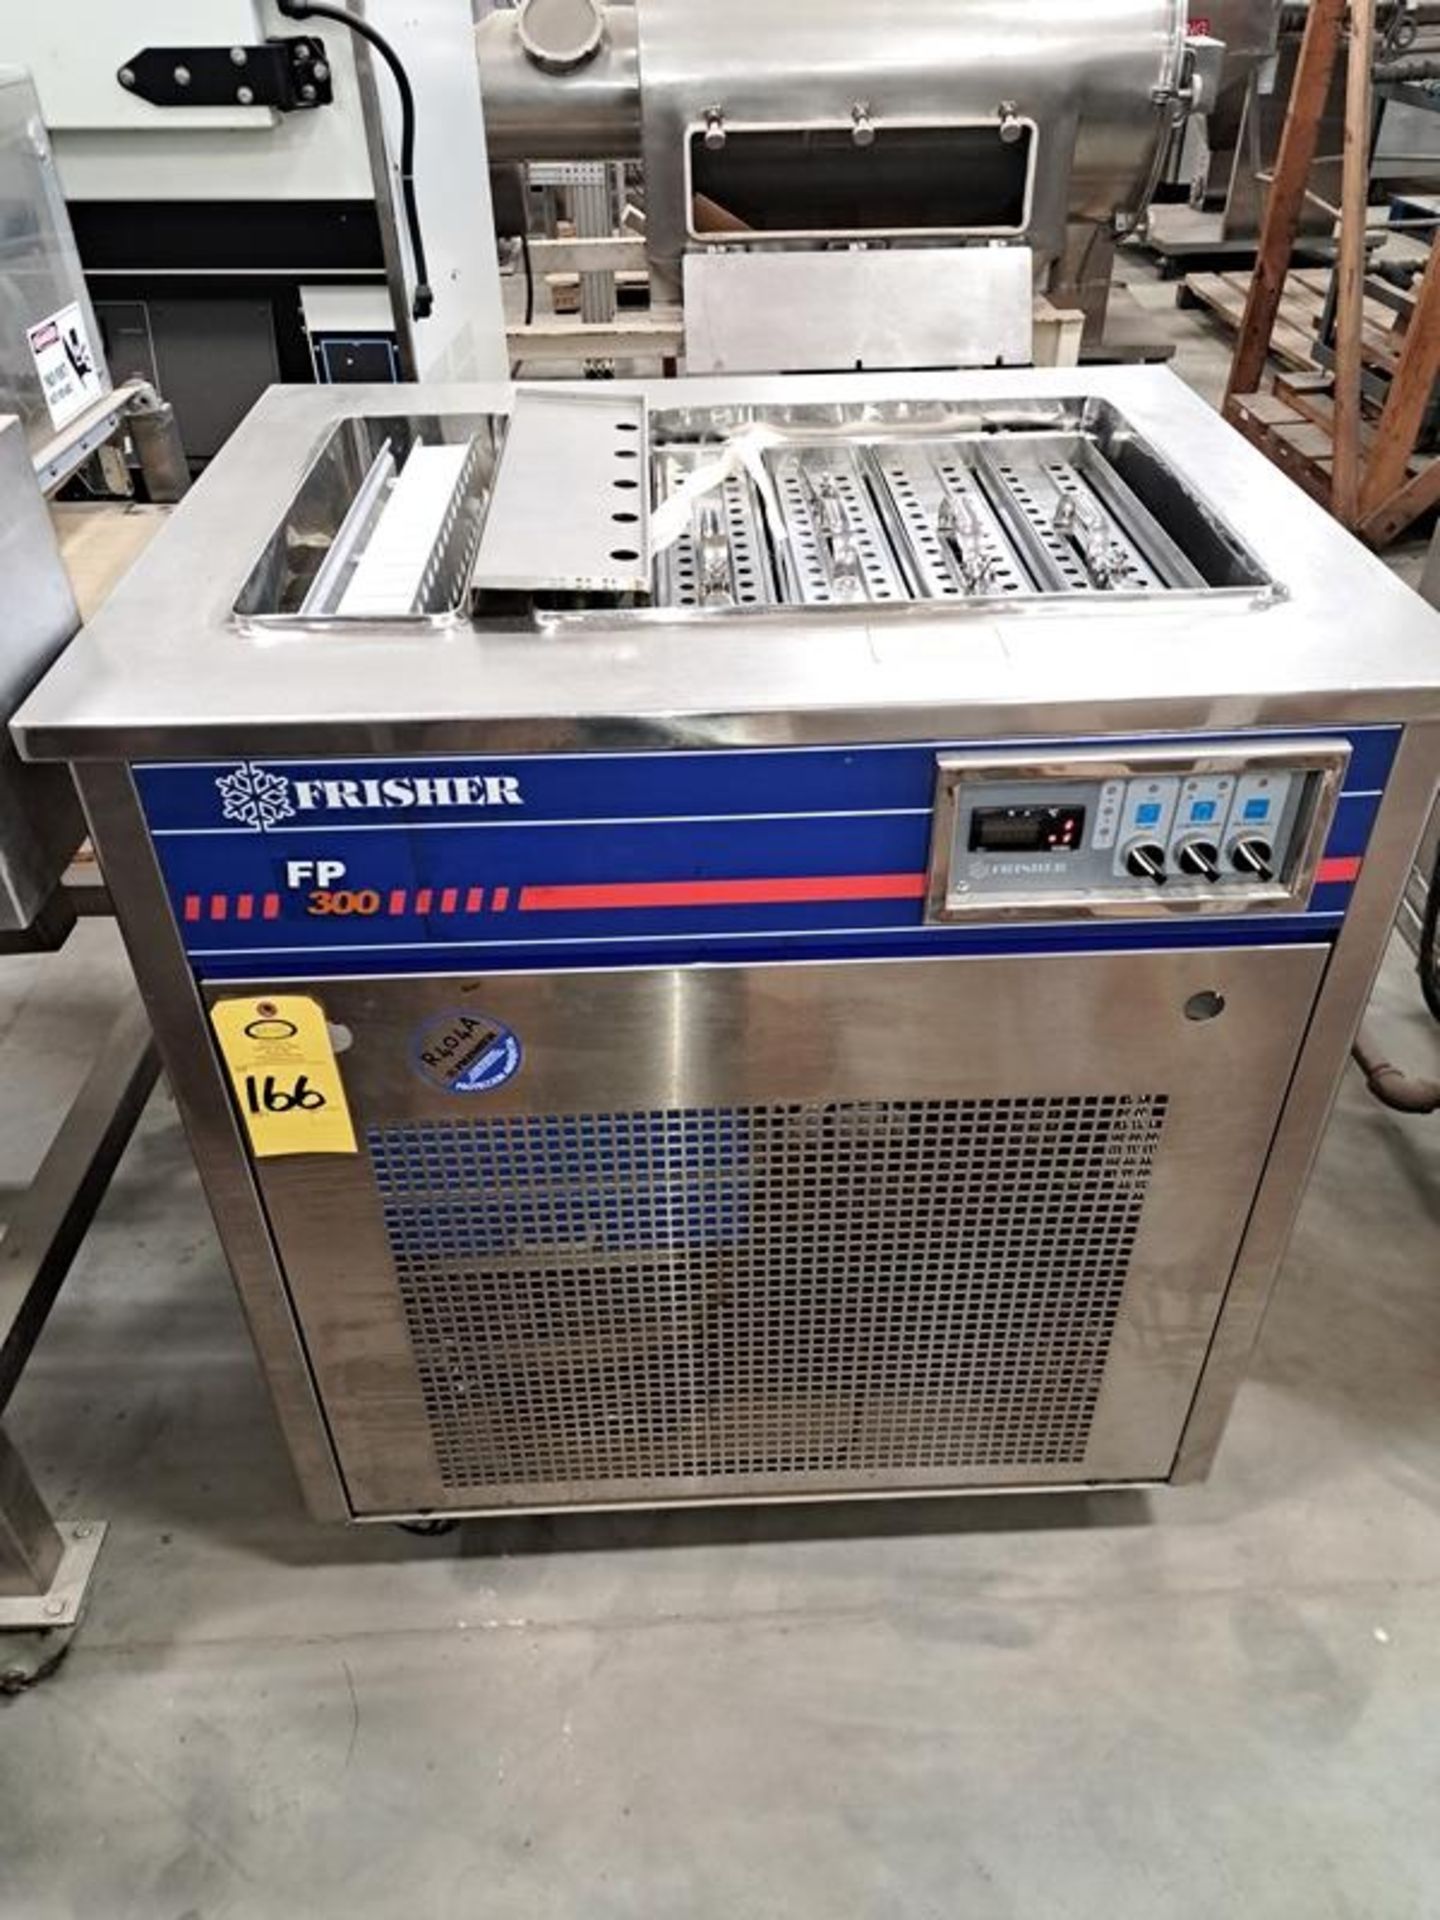 Frisher Mdl. FP300 Ice Cream Stick Maker, manual controls, digital readout, 230 volts, 3 phase (